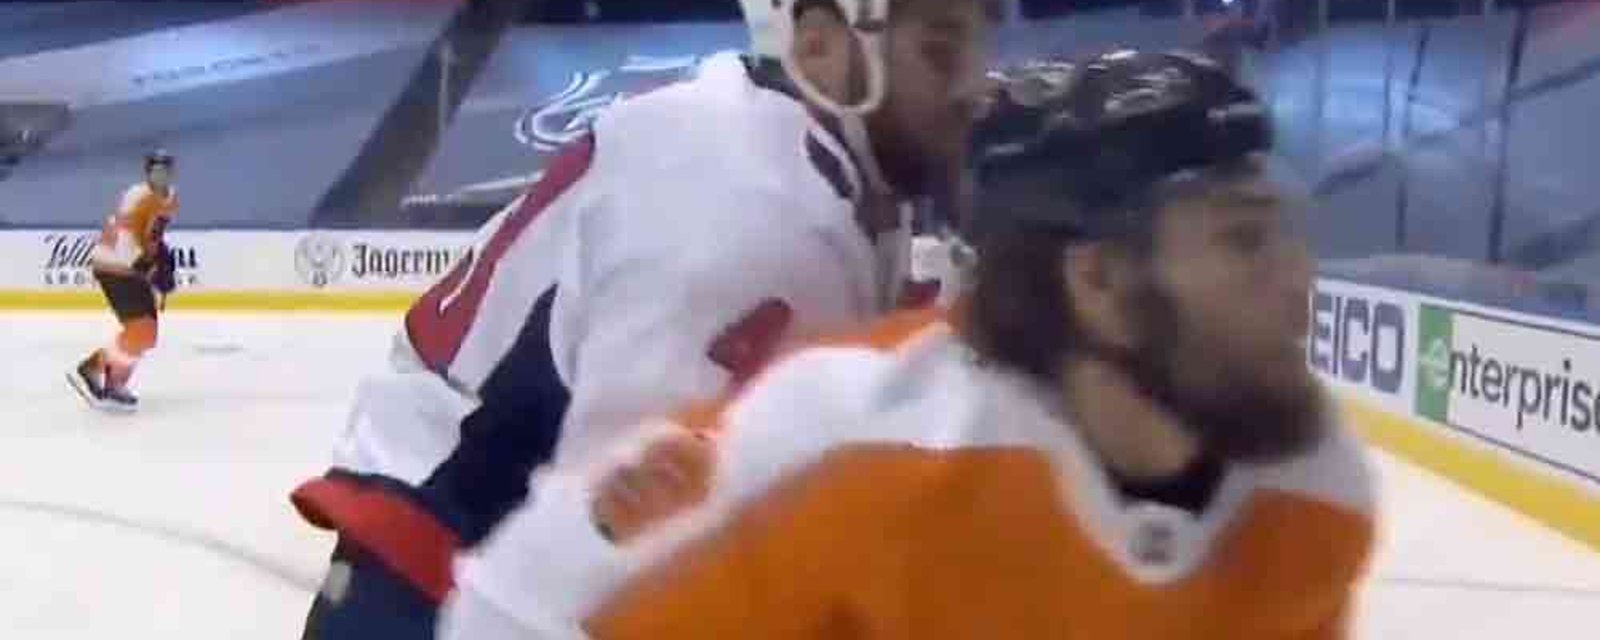 Tom Wilson drills Ivan Provorov with dirty check, could face suspension! 